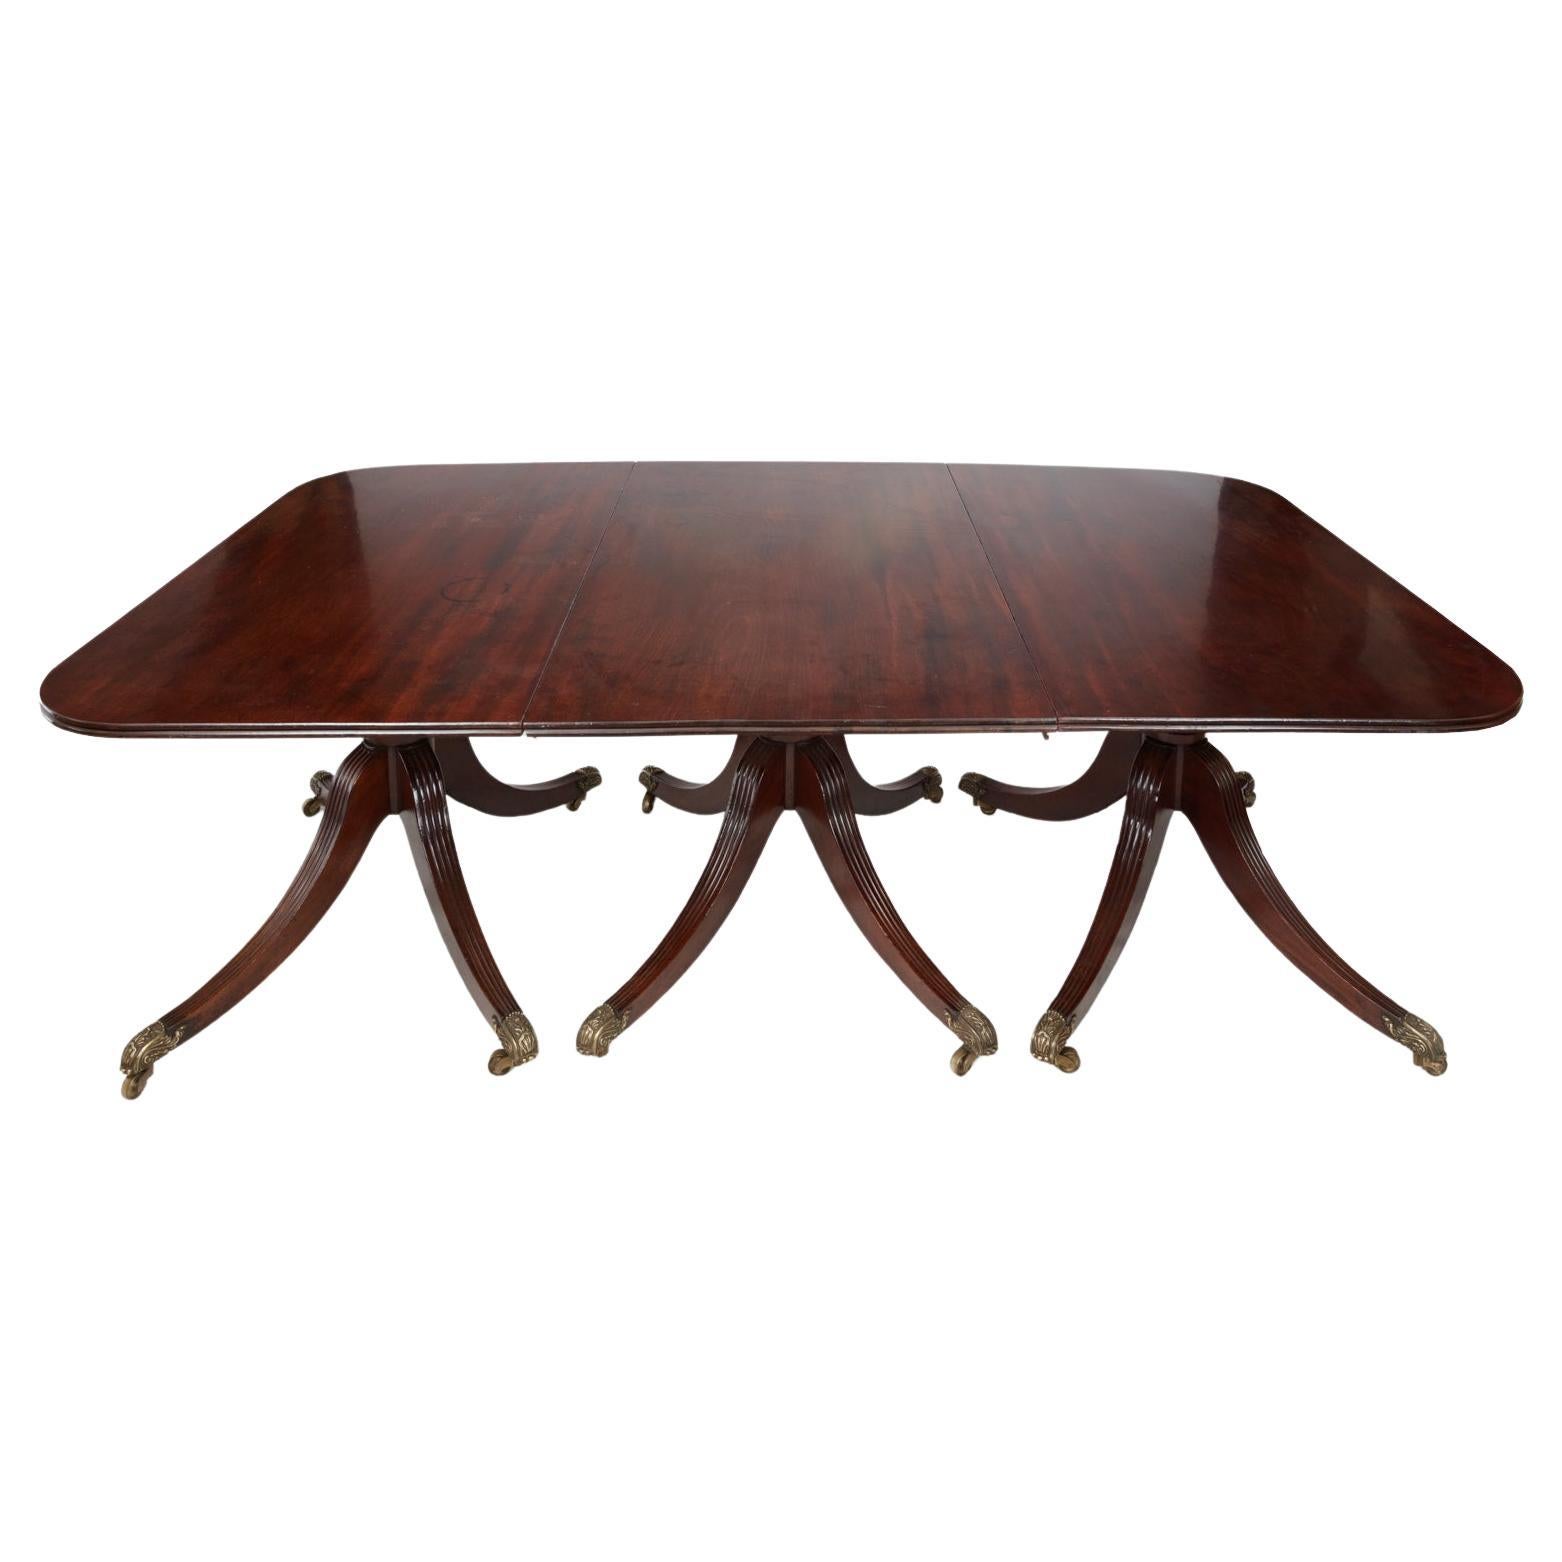 Early 19th Century English Regency Dining Table For Sale